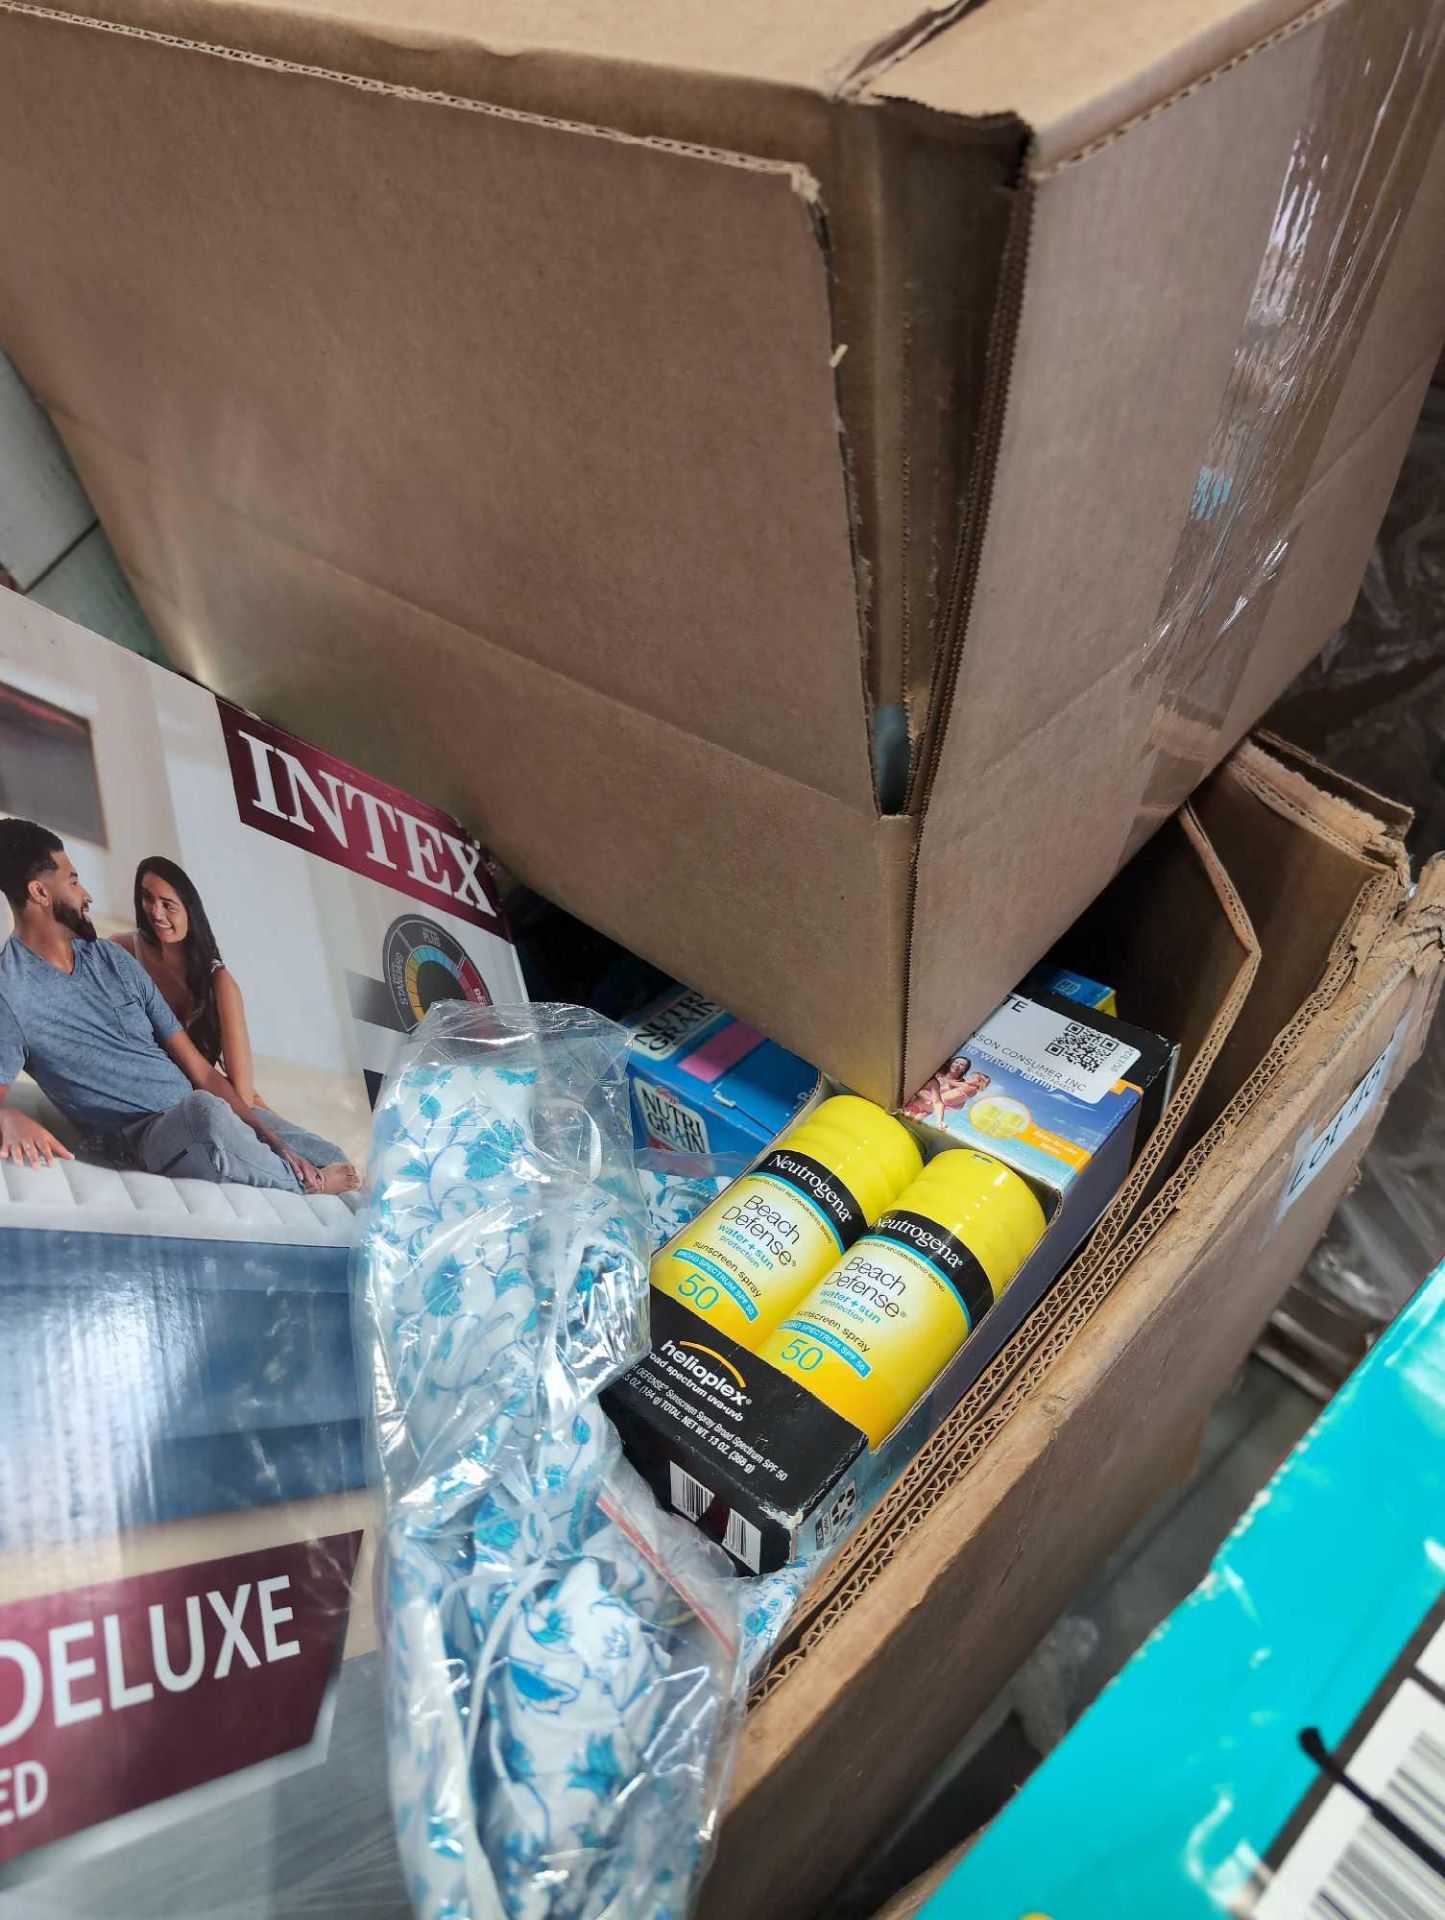 Big box store in a box, pampers, Sheets, Blanket, Intex blow up bed, swiffer wet cloths, gold fish, - Image 8 of 20